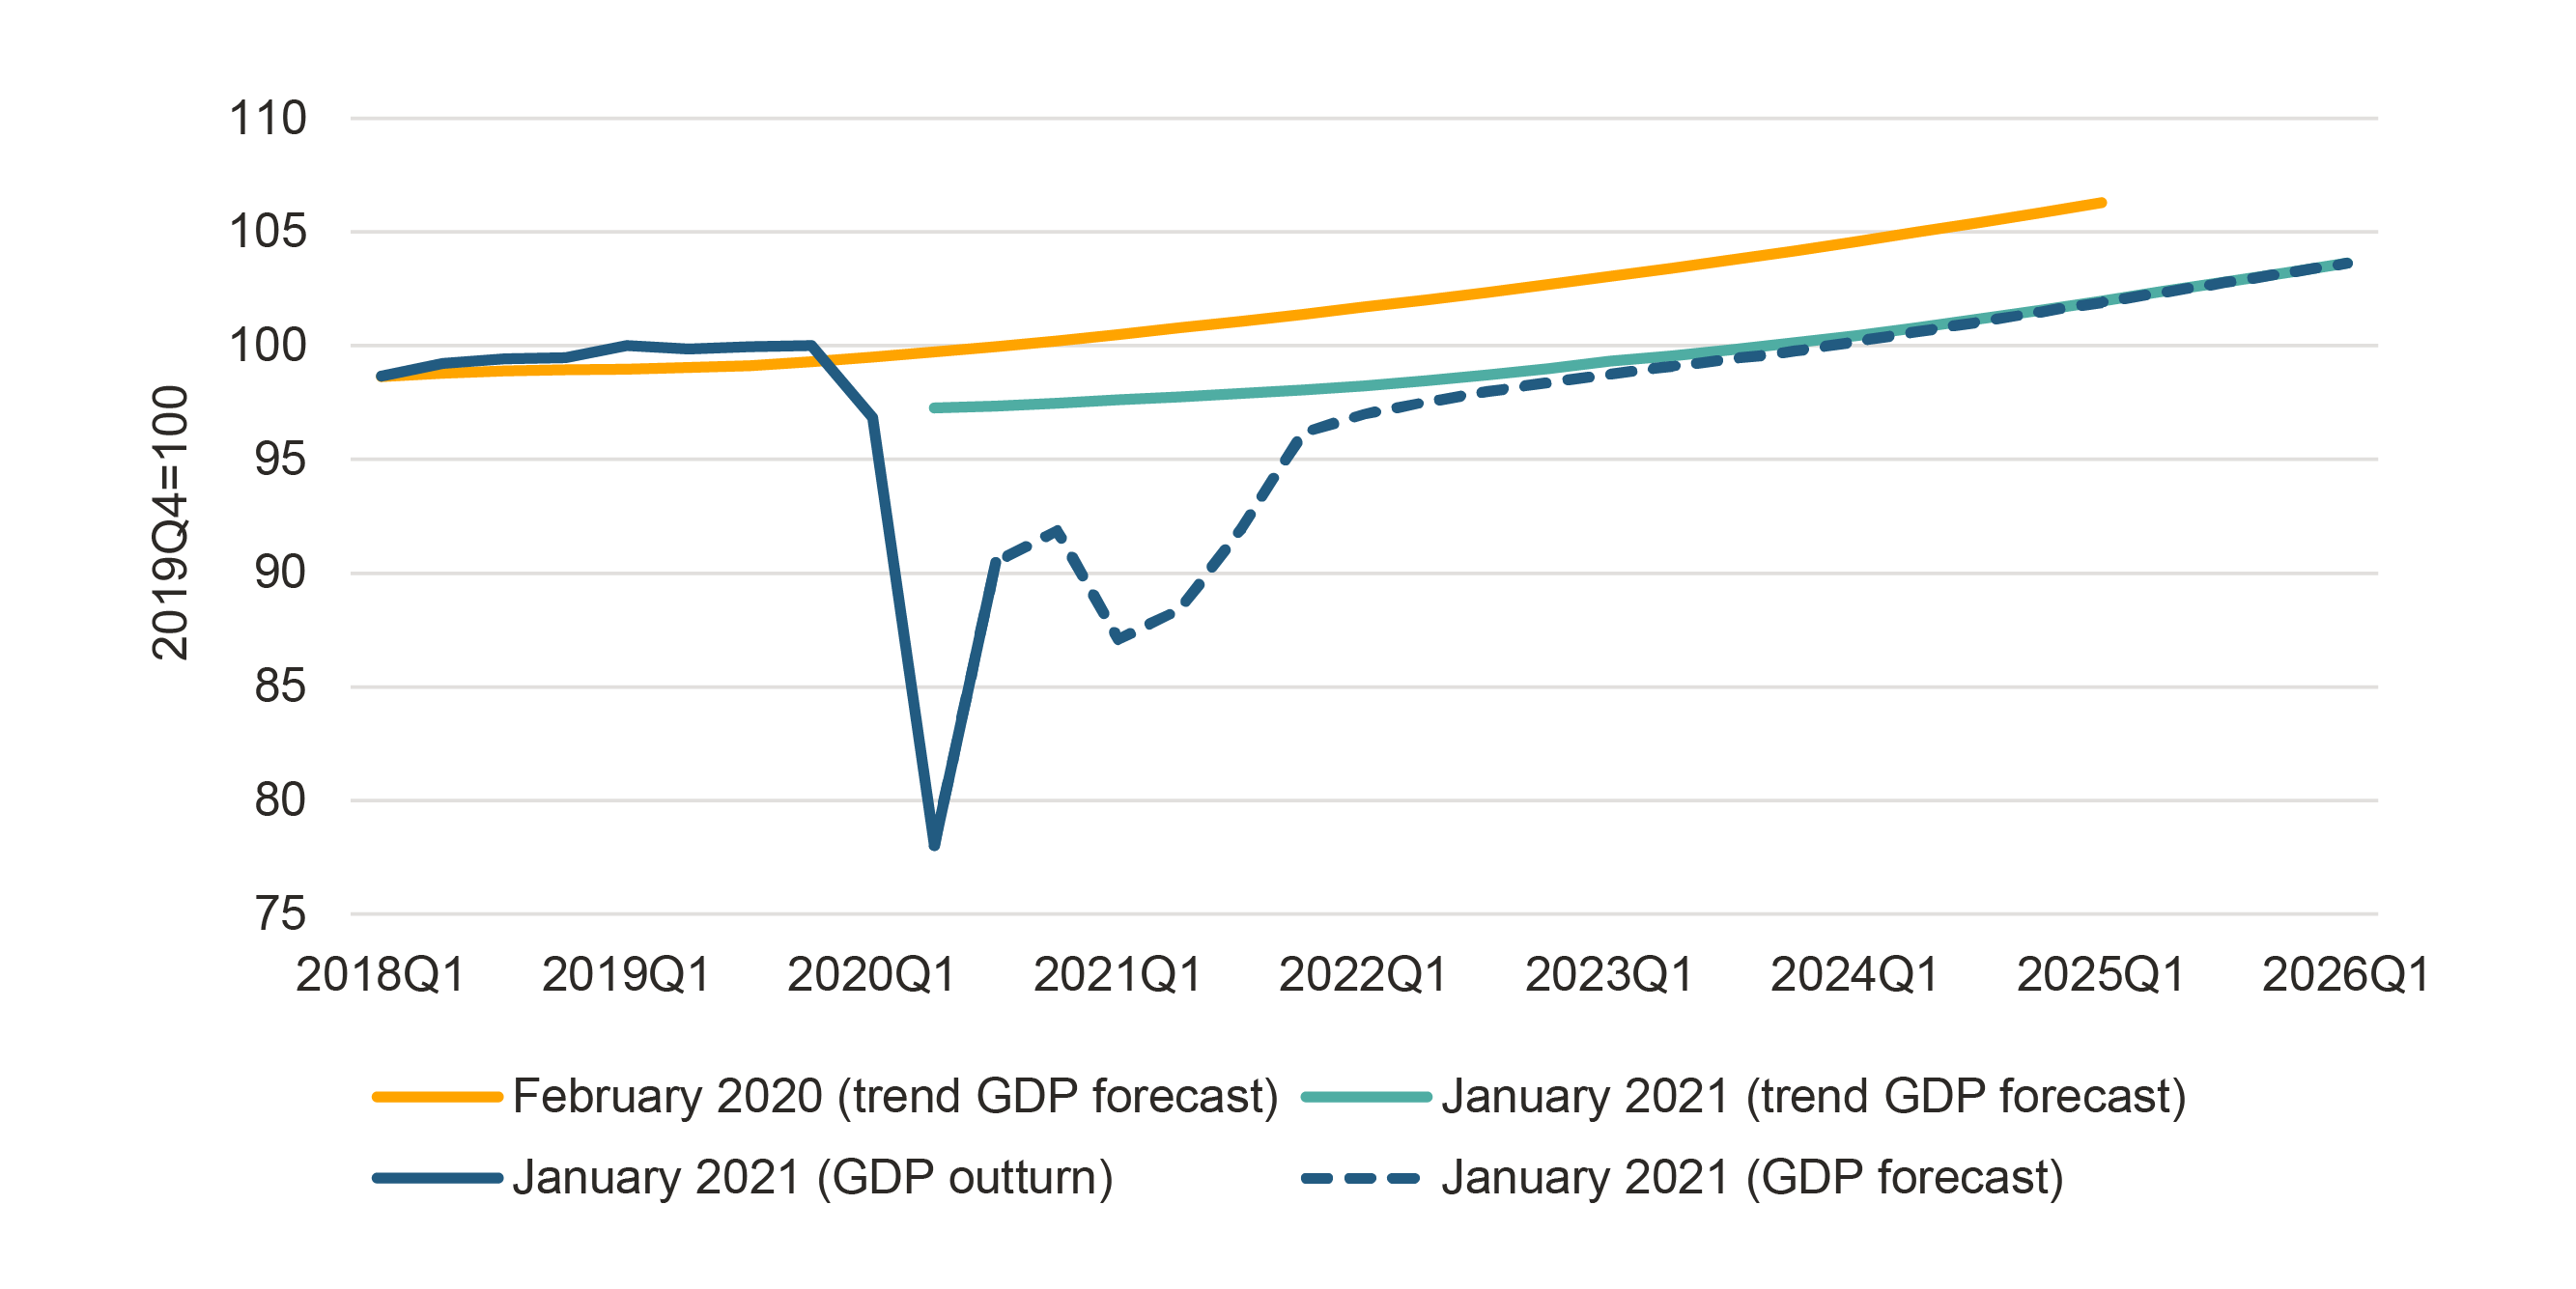 Figure one shows that Scottish GDP fell by almost a quarter during the lockdown in early 202 when compared with the GDP trends in February 2020.